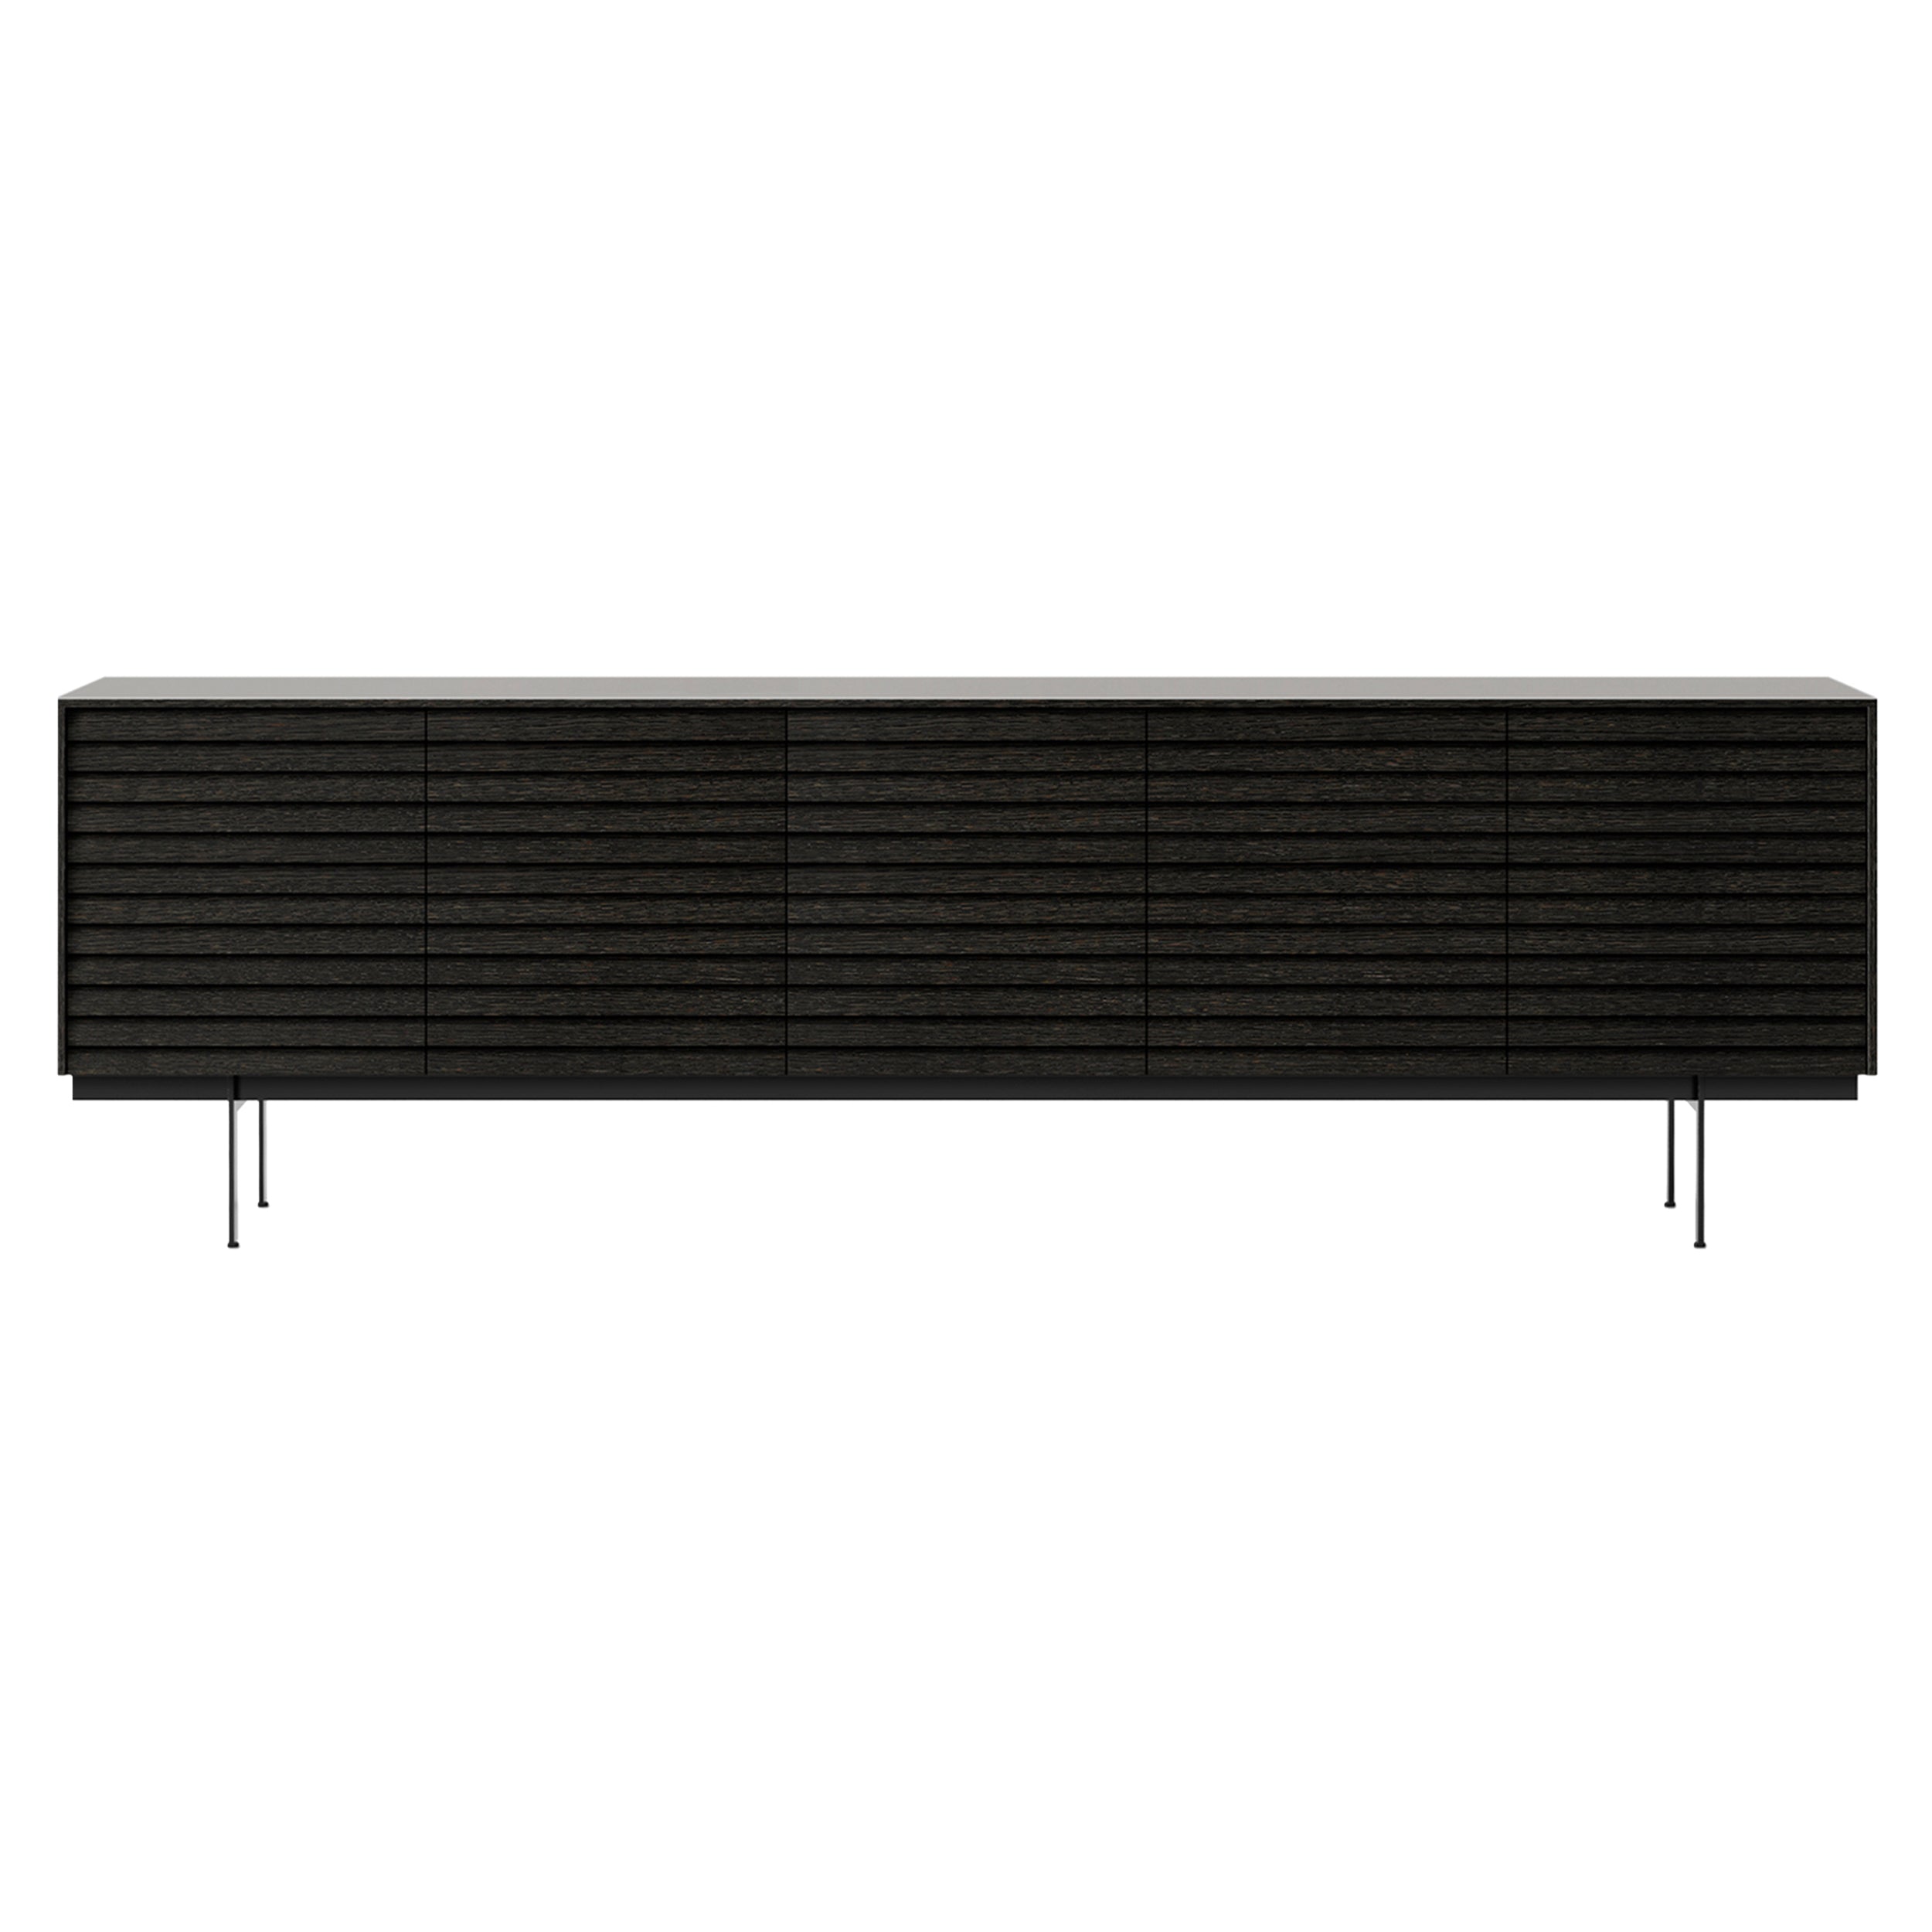 Sussex 12 Sideboard with Drawers: SSX531 + Dark Grey Stained Oak + Black